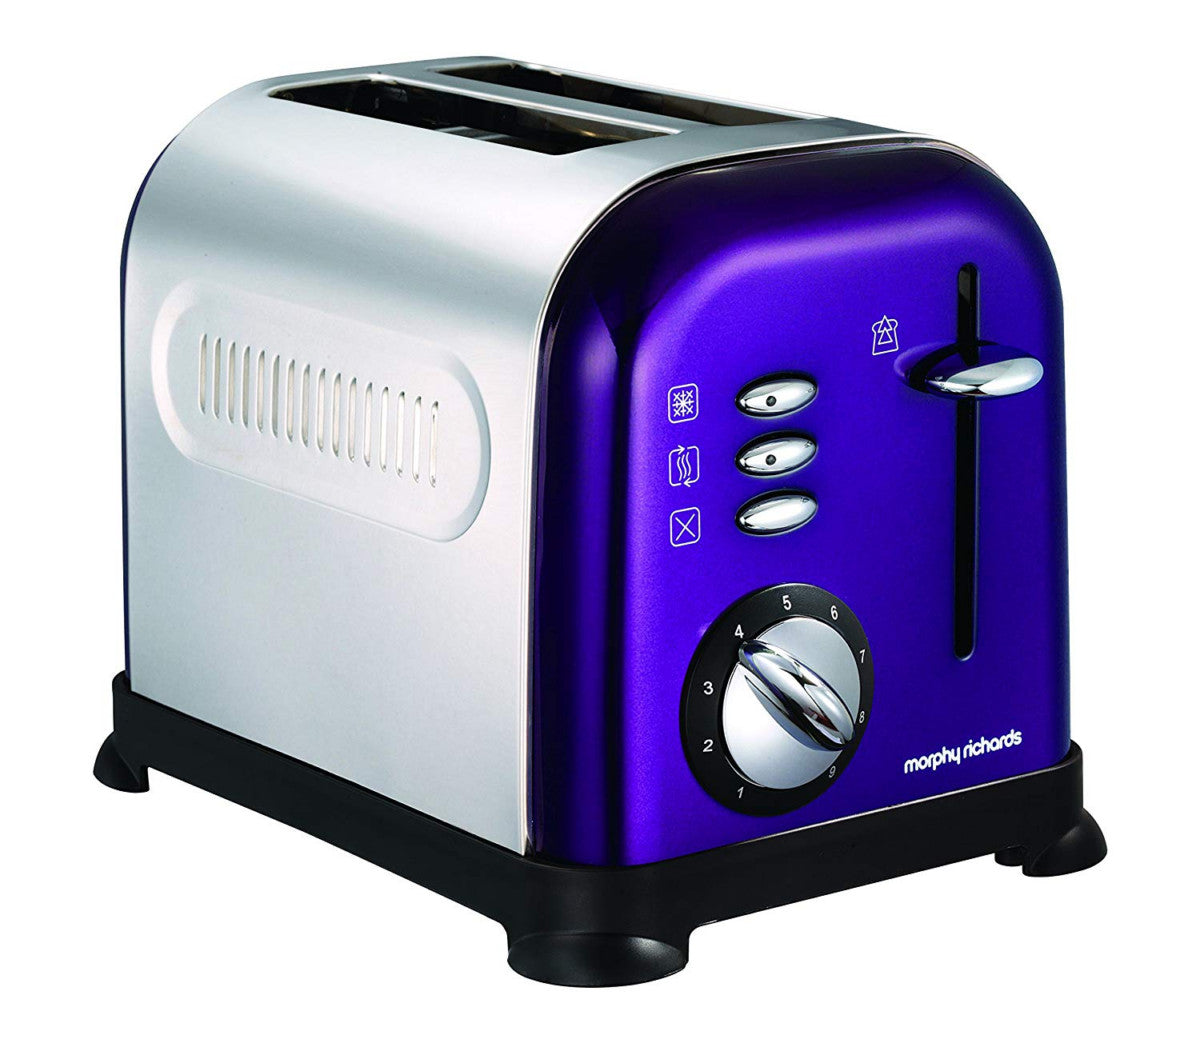 Morphy Richards 44747 Accents Burgundy 2 Slice Toaster 1000W Purple